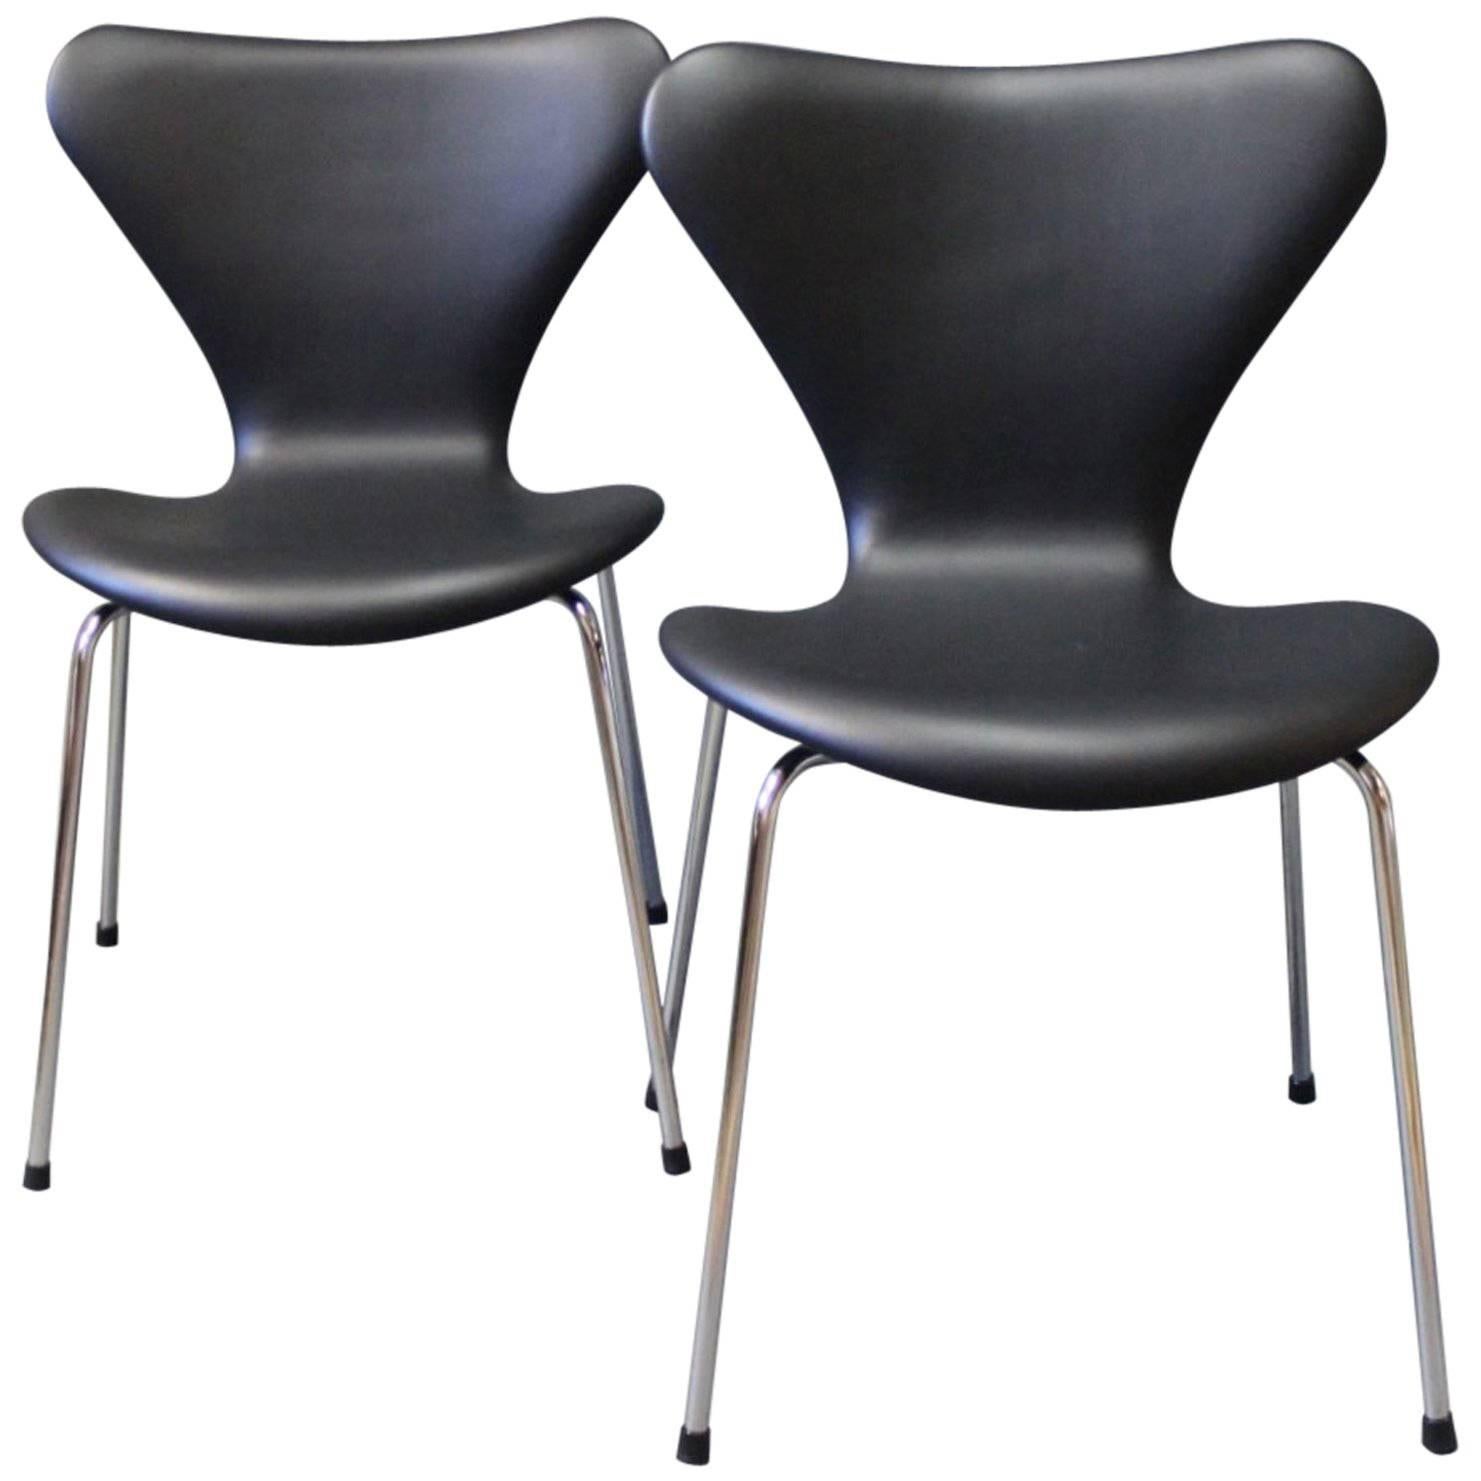 Pair of Seven Chairs, Model 3107, by Arne Jacobsen and Fritz Hansen, 1967